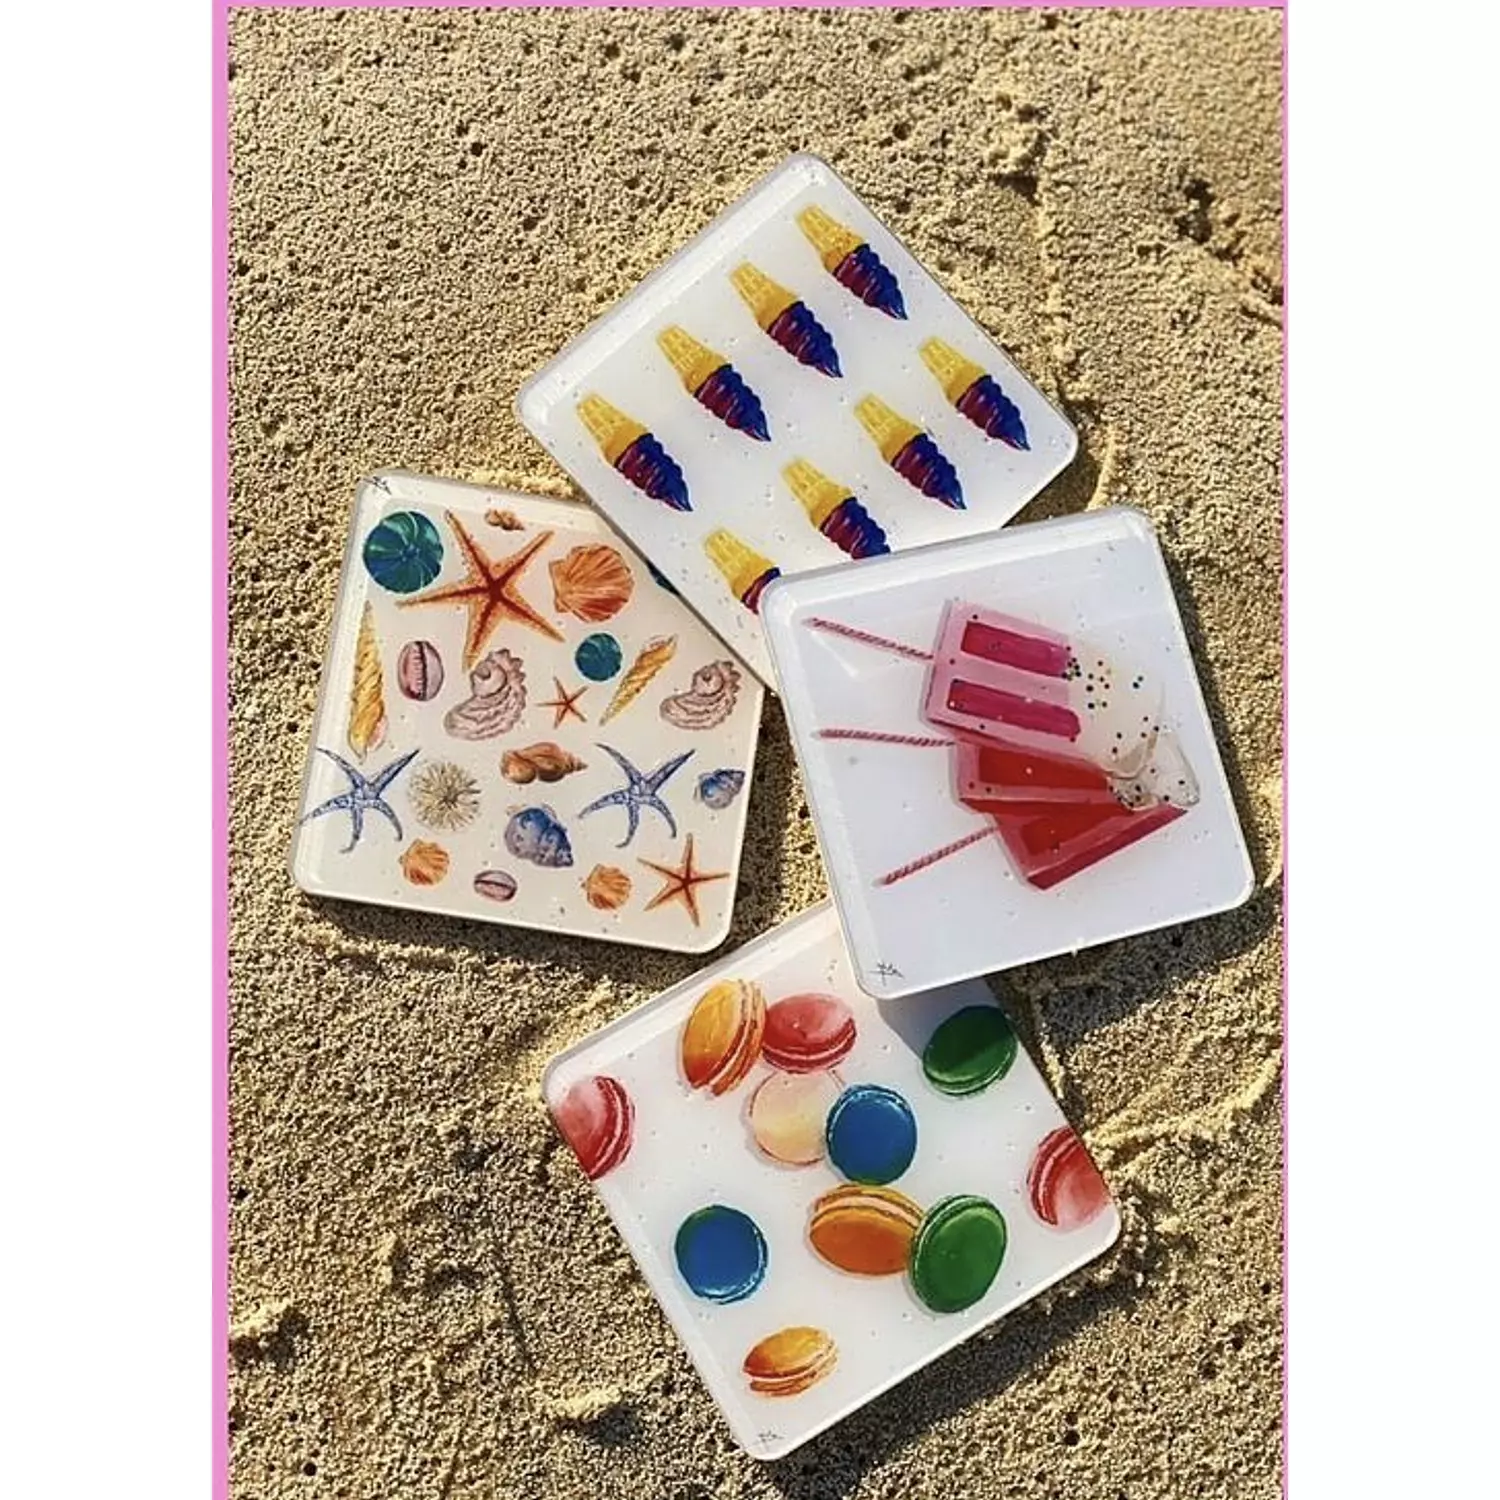 Summer Mix Hand-Painted Coaster Sets (by M.H) hover image